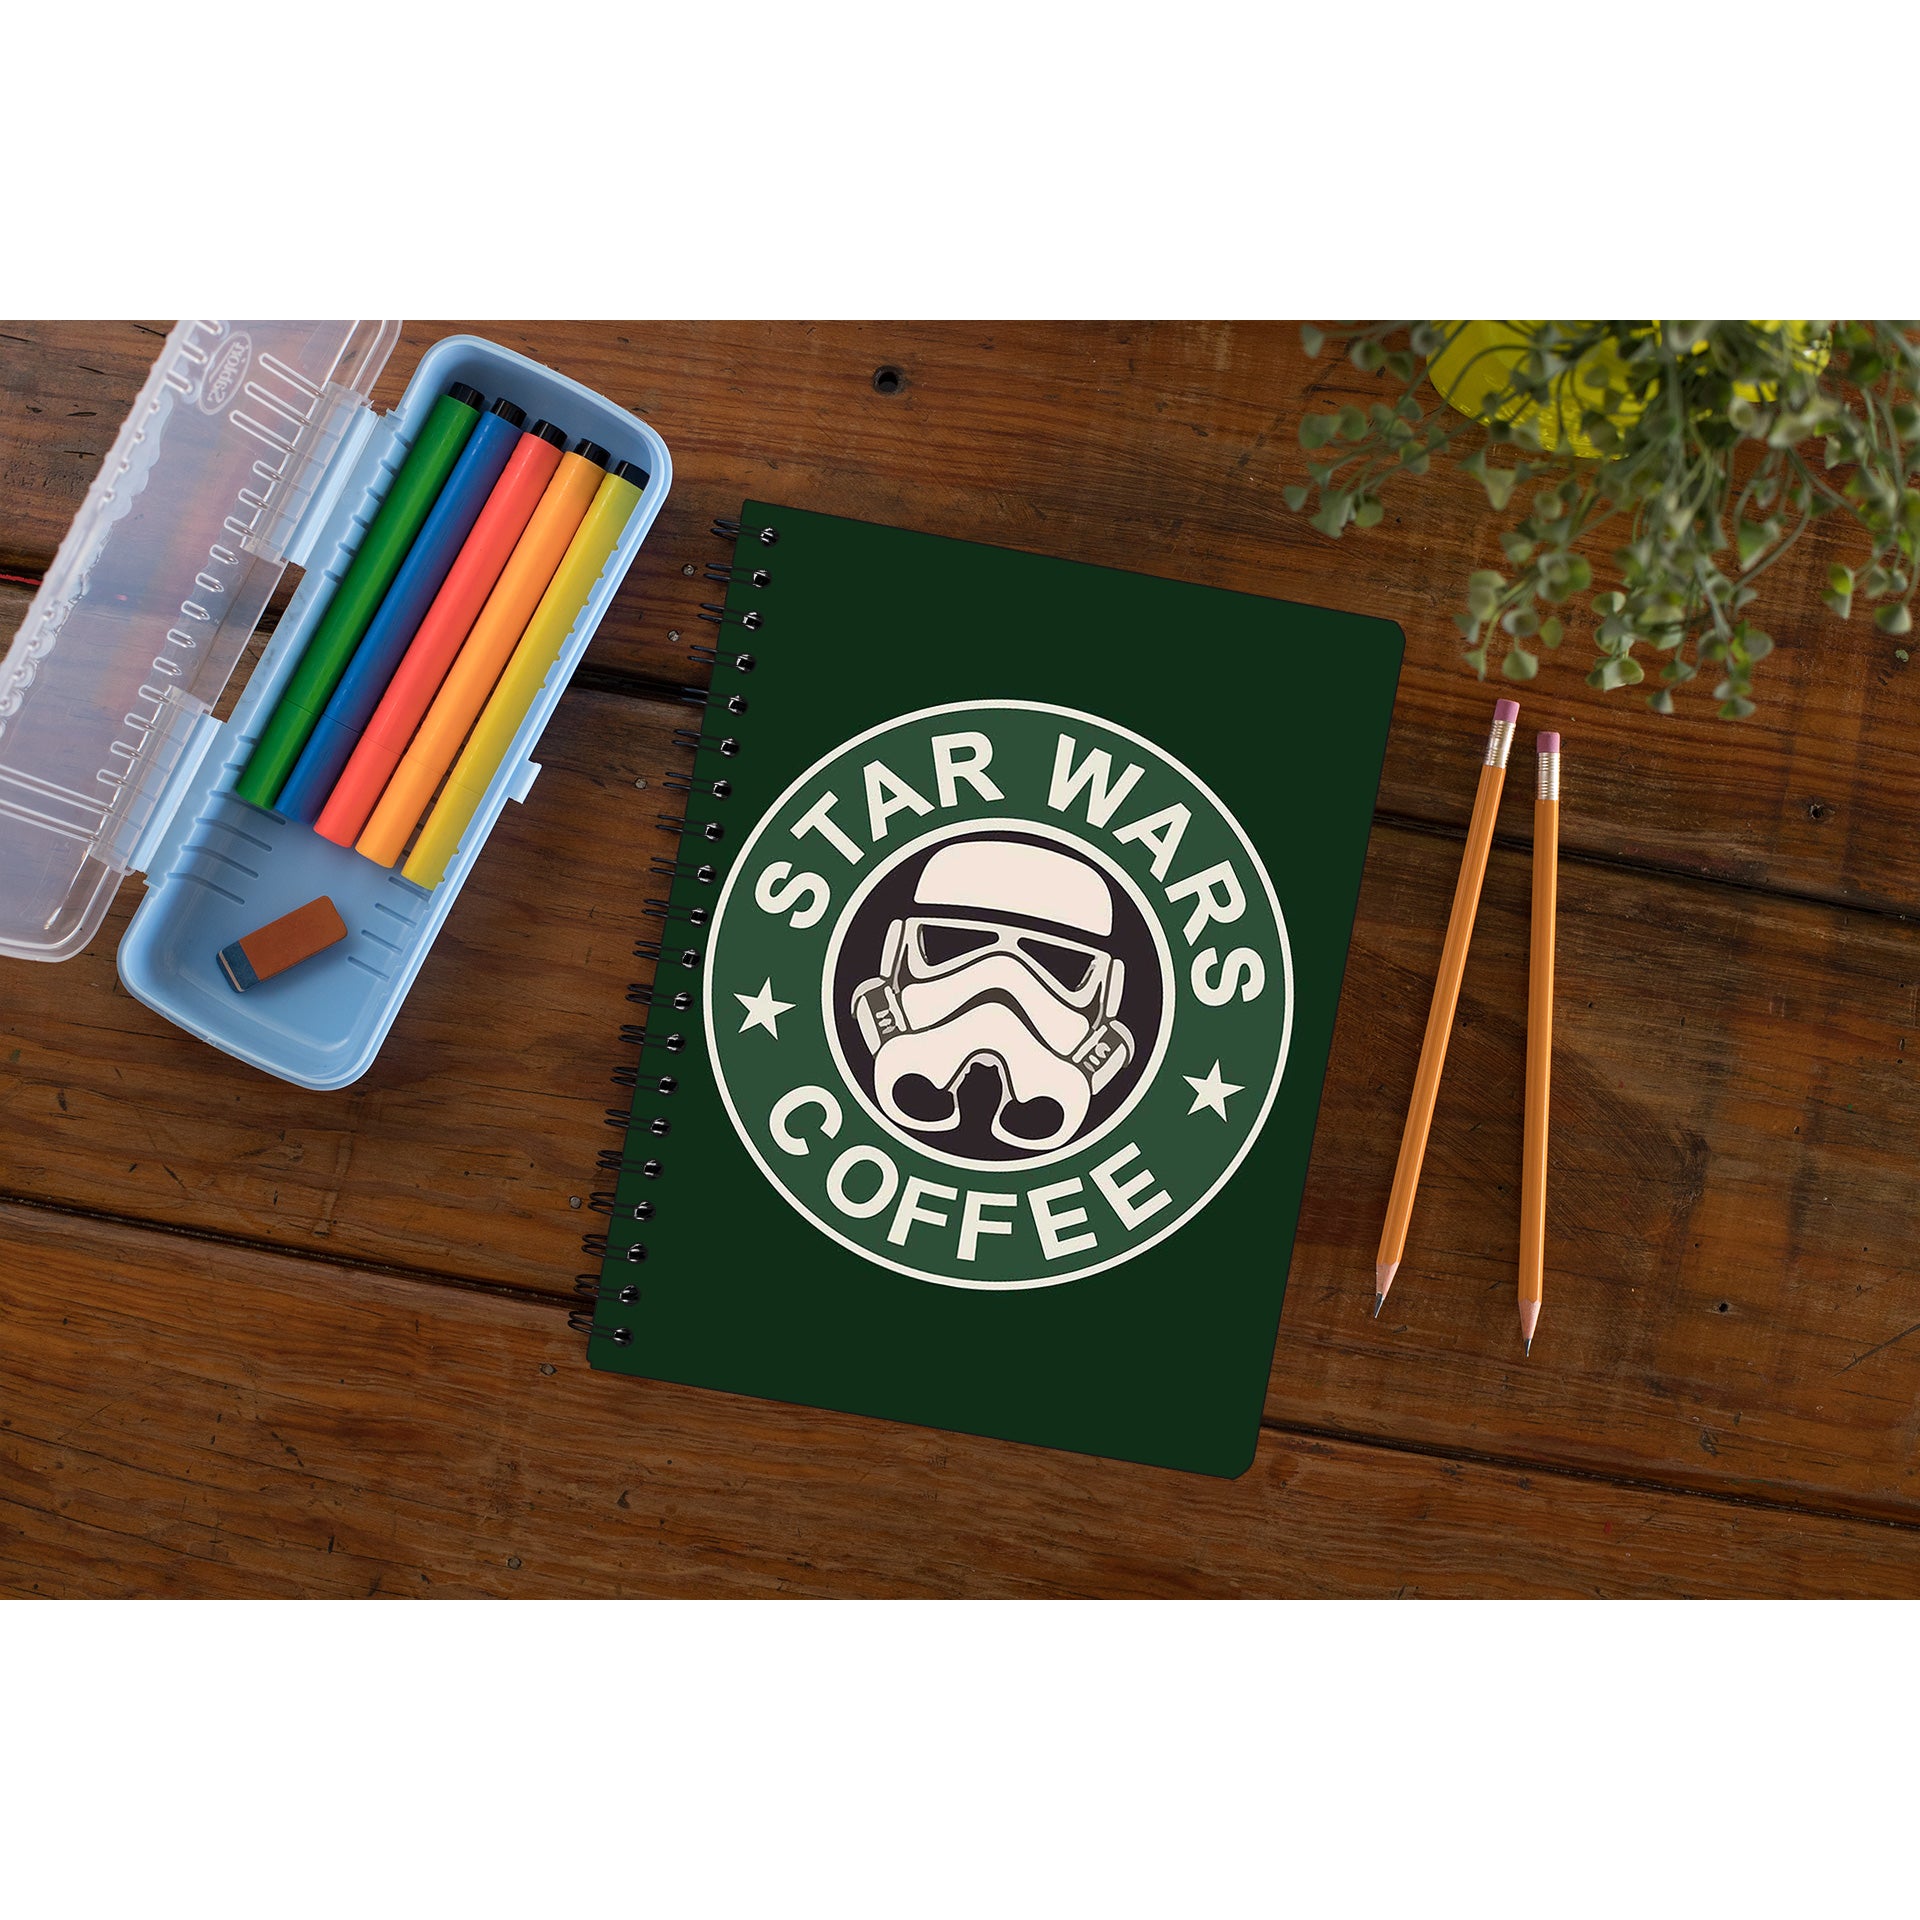 star wars star coffee notebook notepad diary buy online india the banyan tee tbt unruled